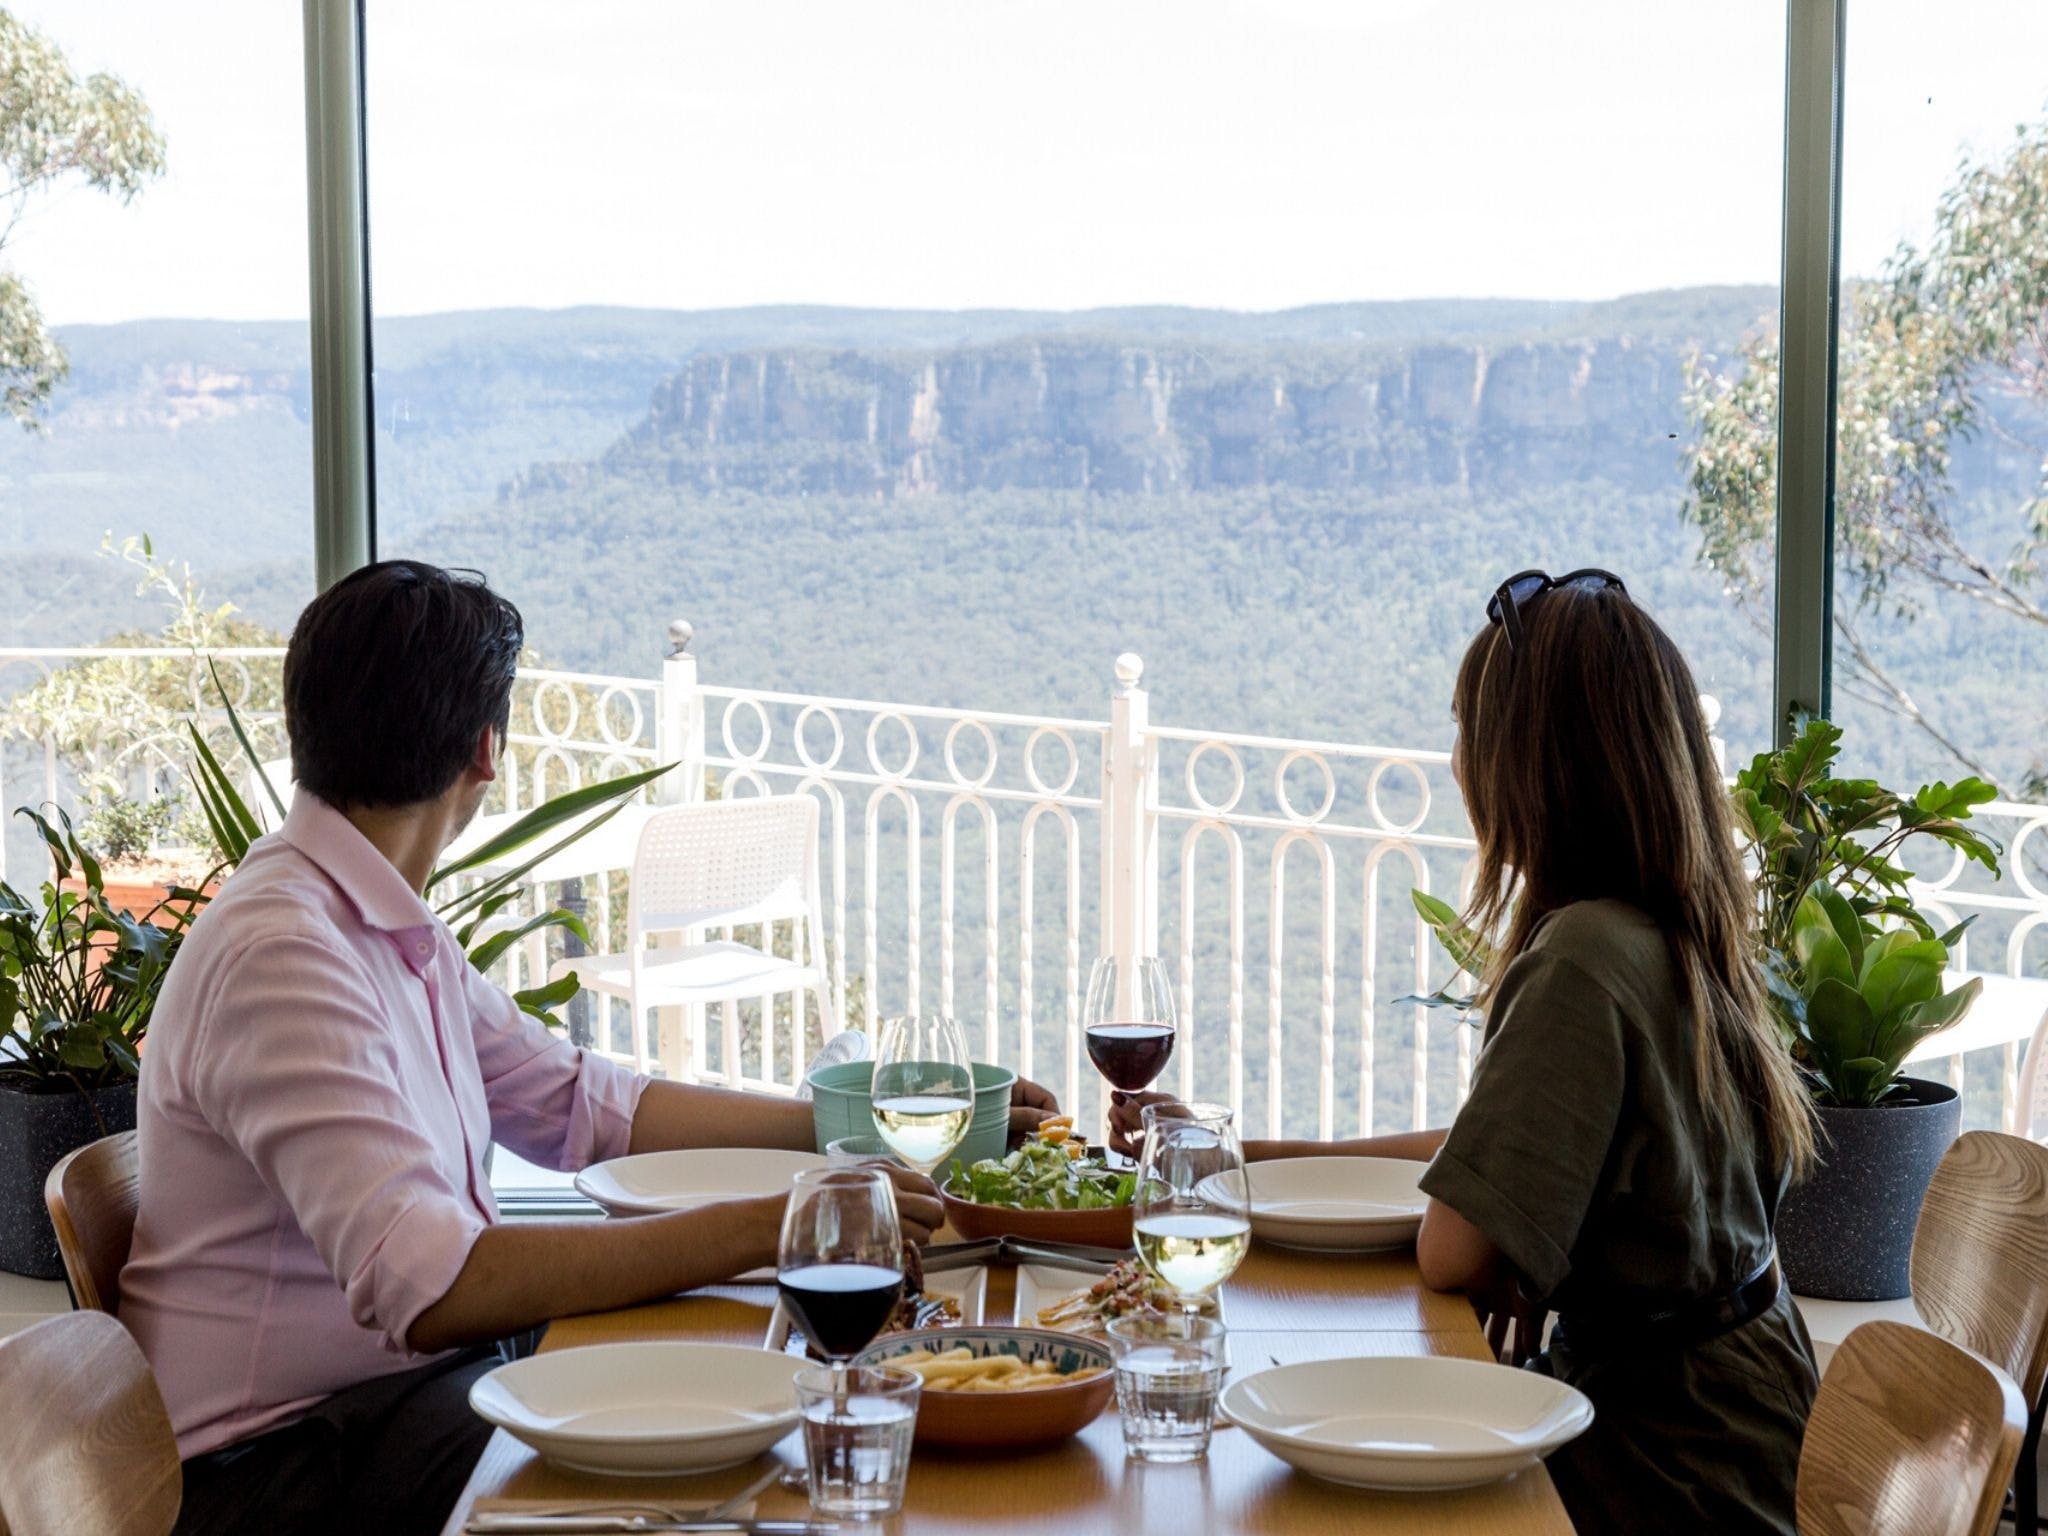 Christmas Day Lunch at The Lookout Echo Point - C Tourism